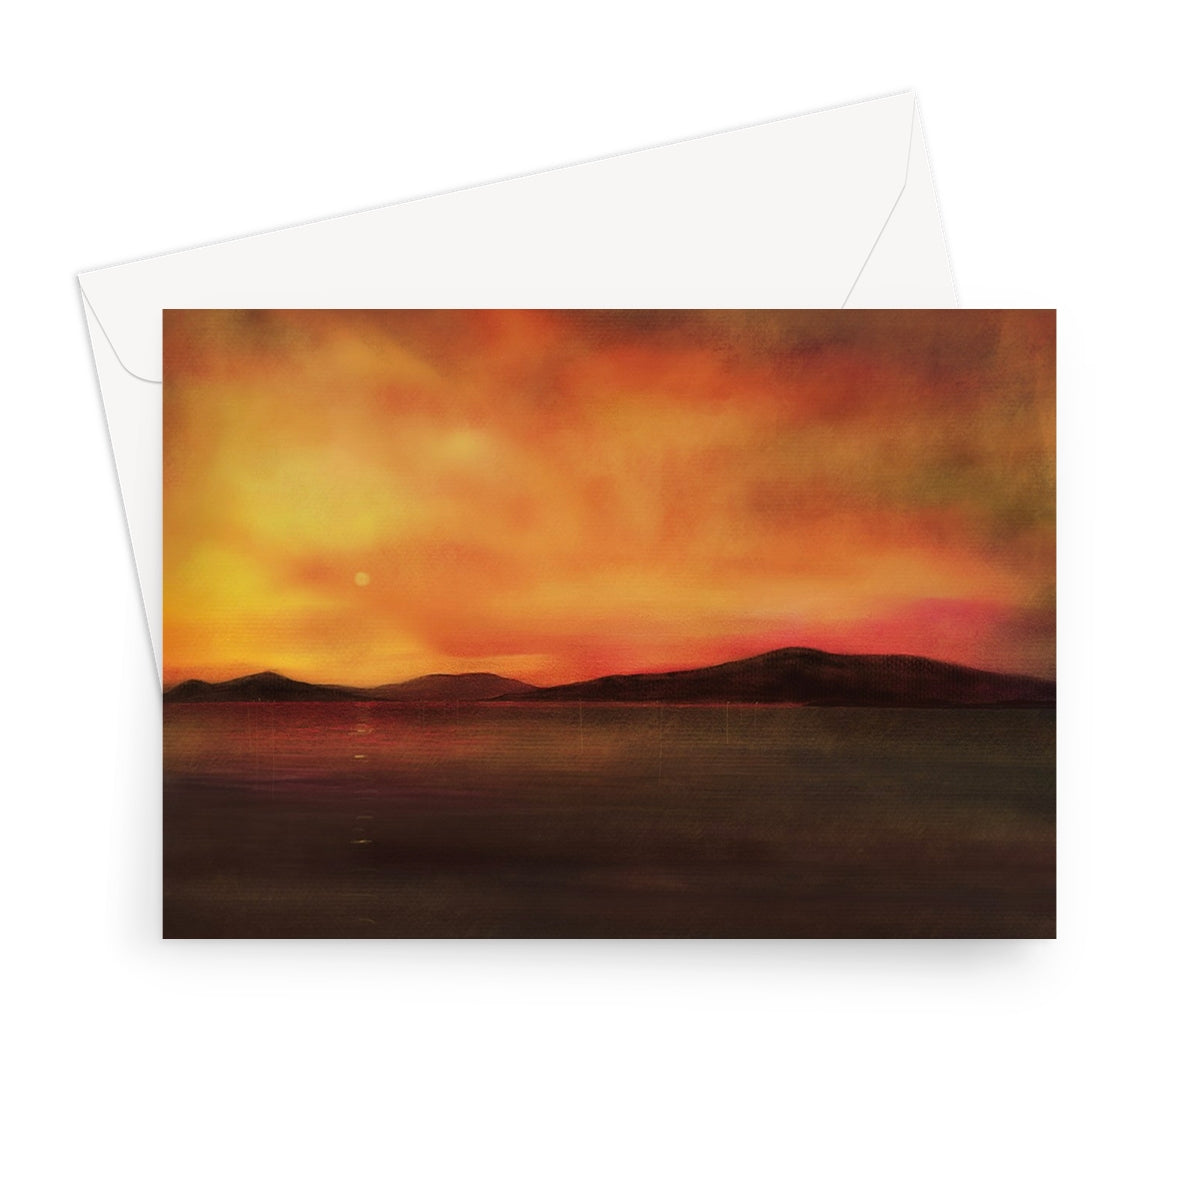 Harris Sunset Art Gifts Greeting Card-Greetings Cards-Hebridean Islands Art Gallery-7"x5"-10 Cards-Paintings, Prints, Homeware, Art Gifts From Scotland By Scottish Artist Kevin Hunter